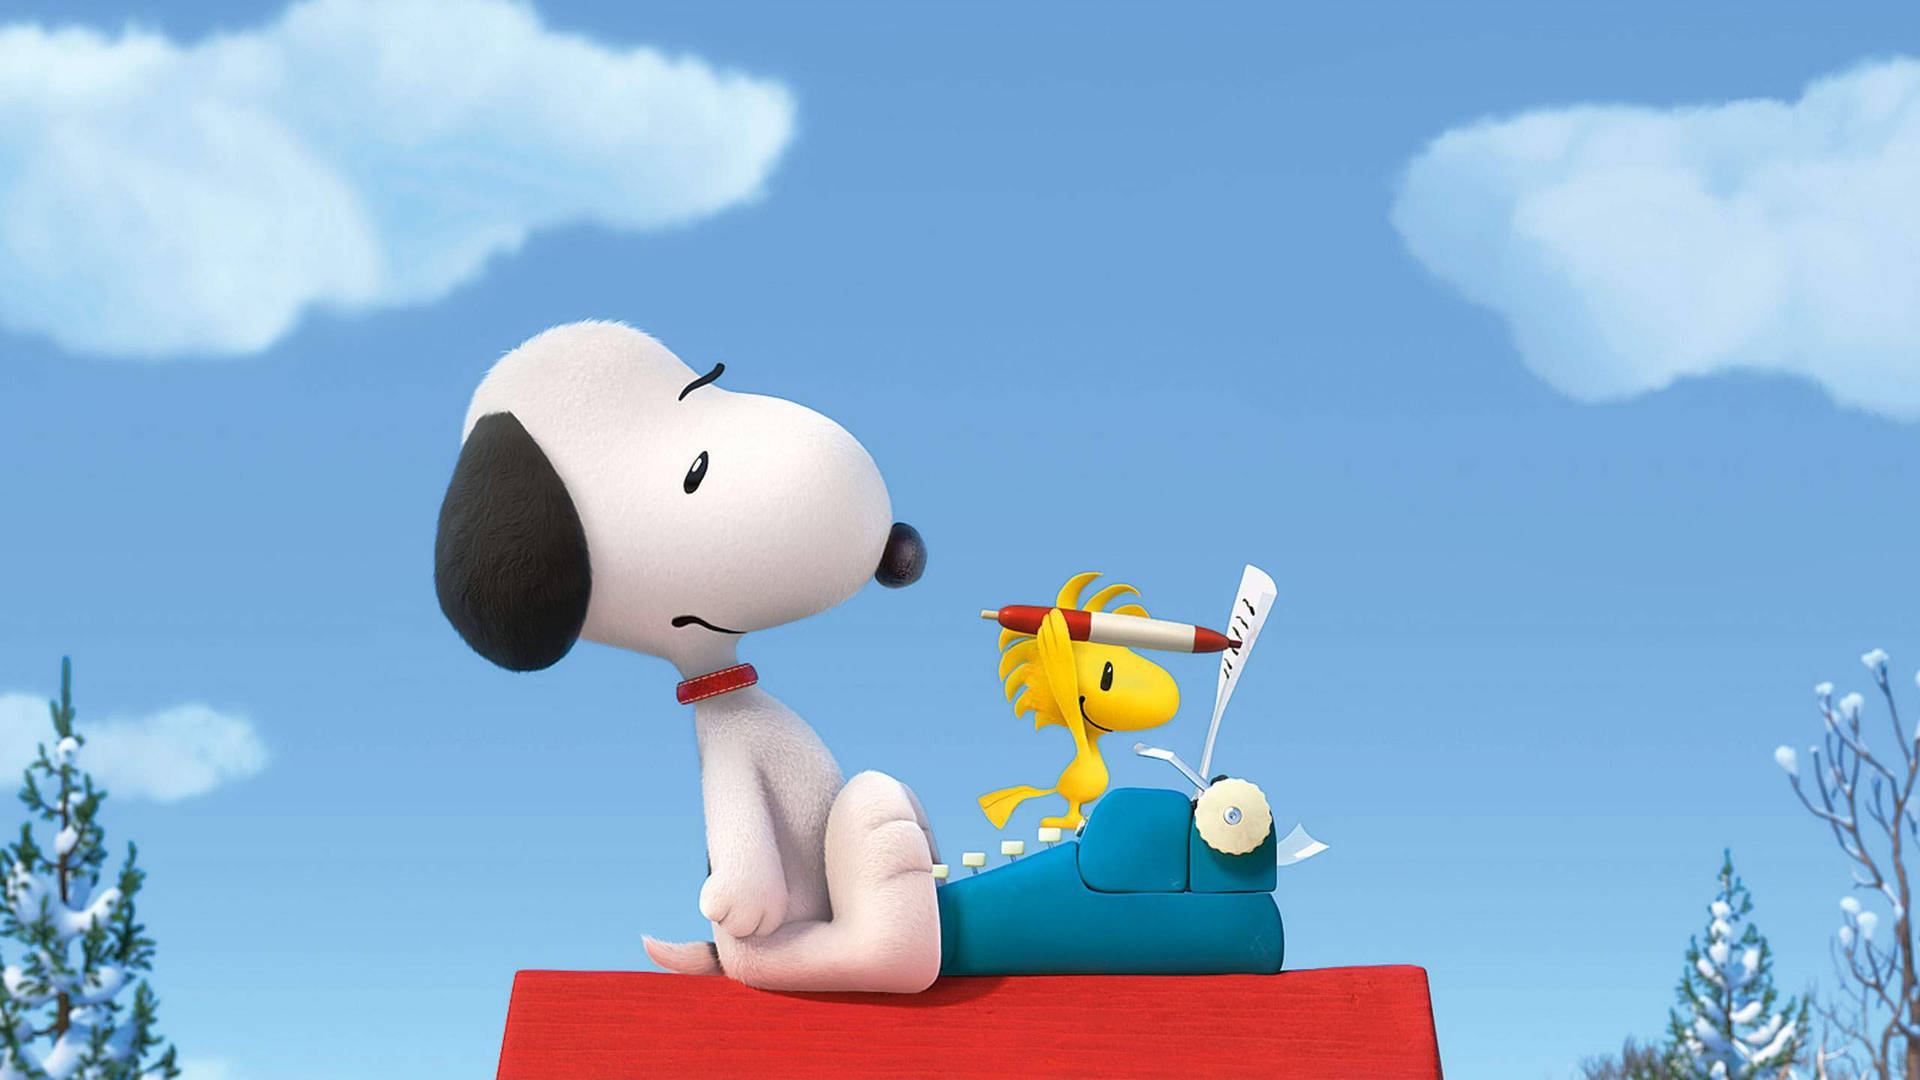 Snoopy 2560X1440 Wallpaper and Background Image